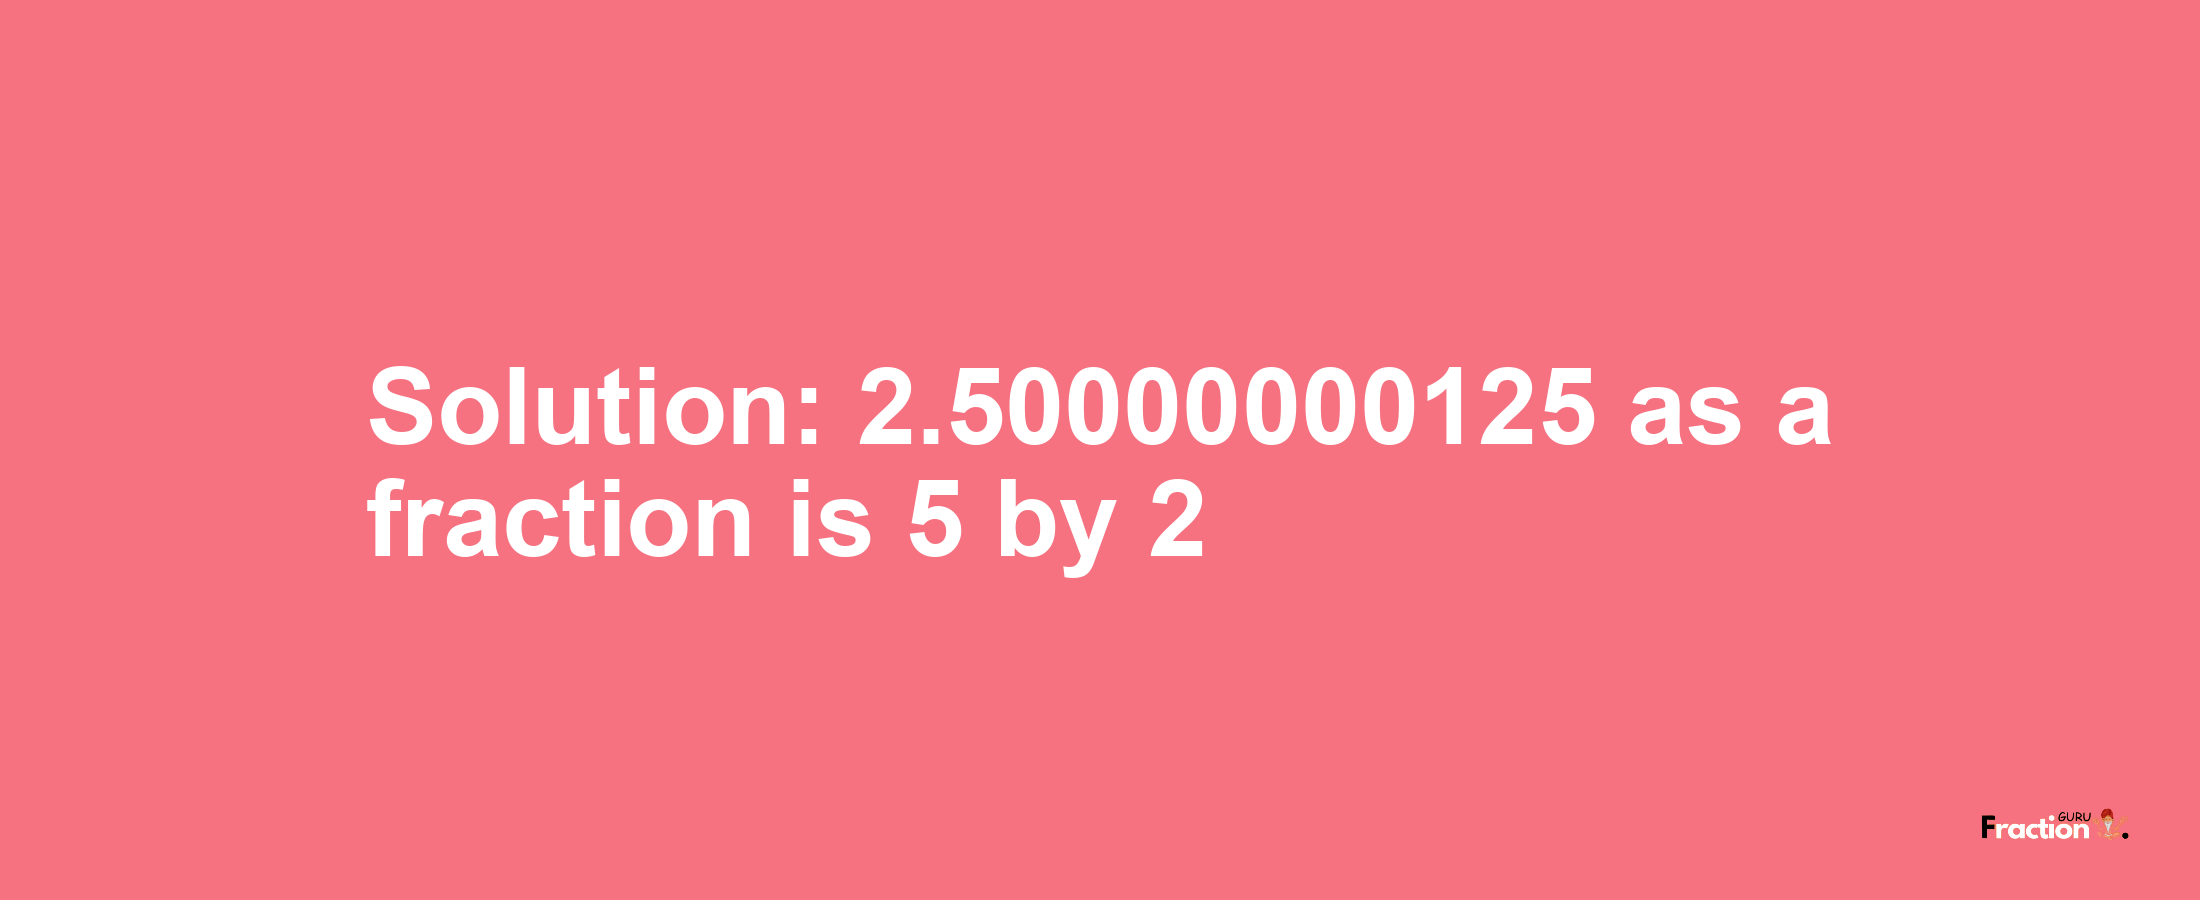 Solution:2.50000000125 as a fraction is 5/2